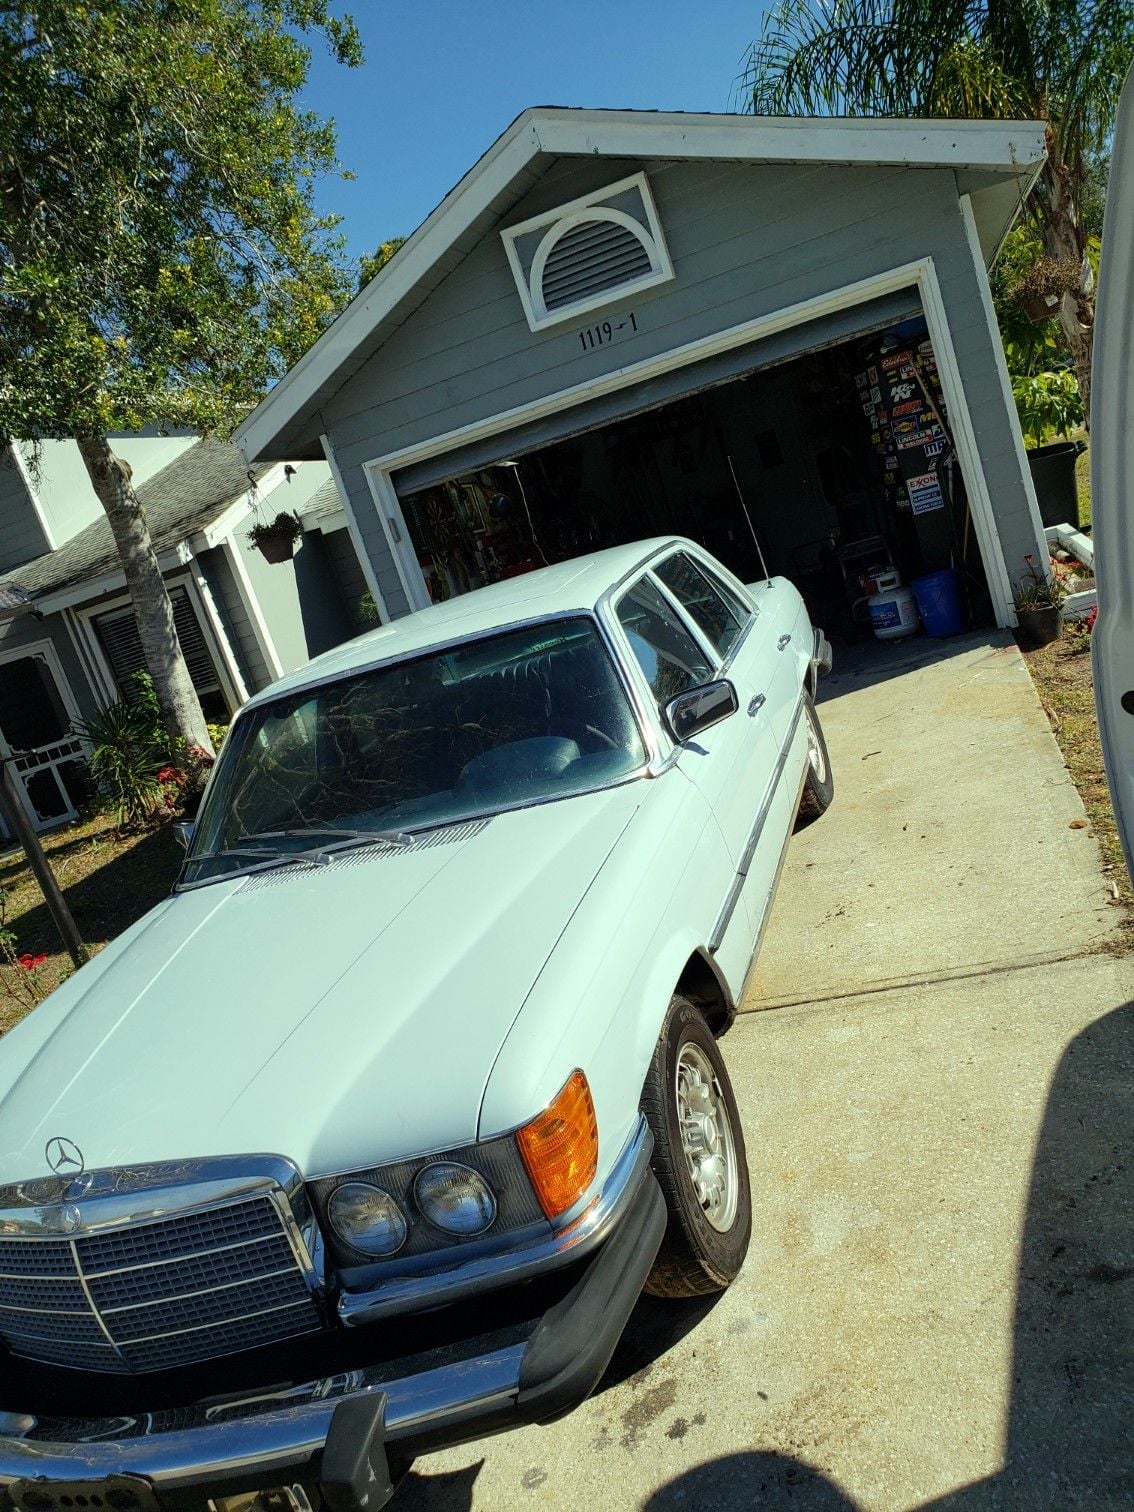 1979 Mercedes-Benz 300SD - Looking for a good home for this beautiful turbo diesel w116 - Used - VIN 11612012003106 - 164,000 Miles - 2WD - Automatic - Sedan - Blue - Port Orange, FL 32127, United States